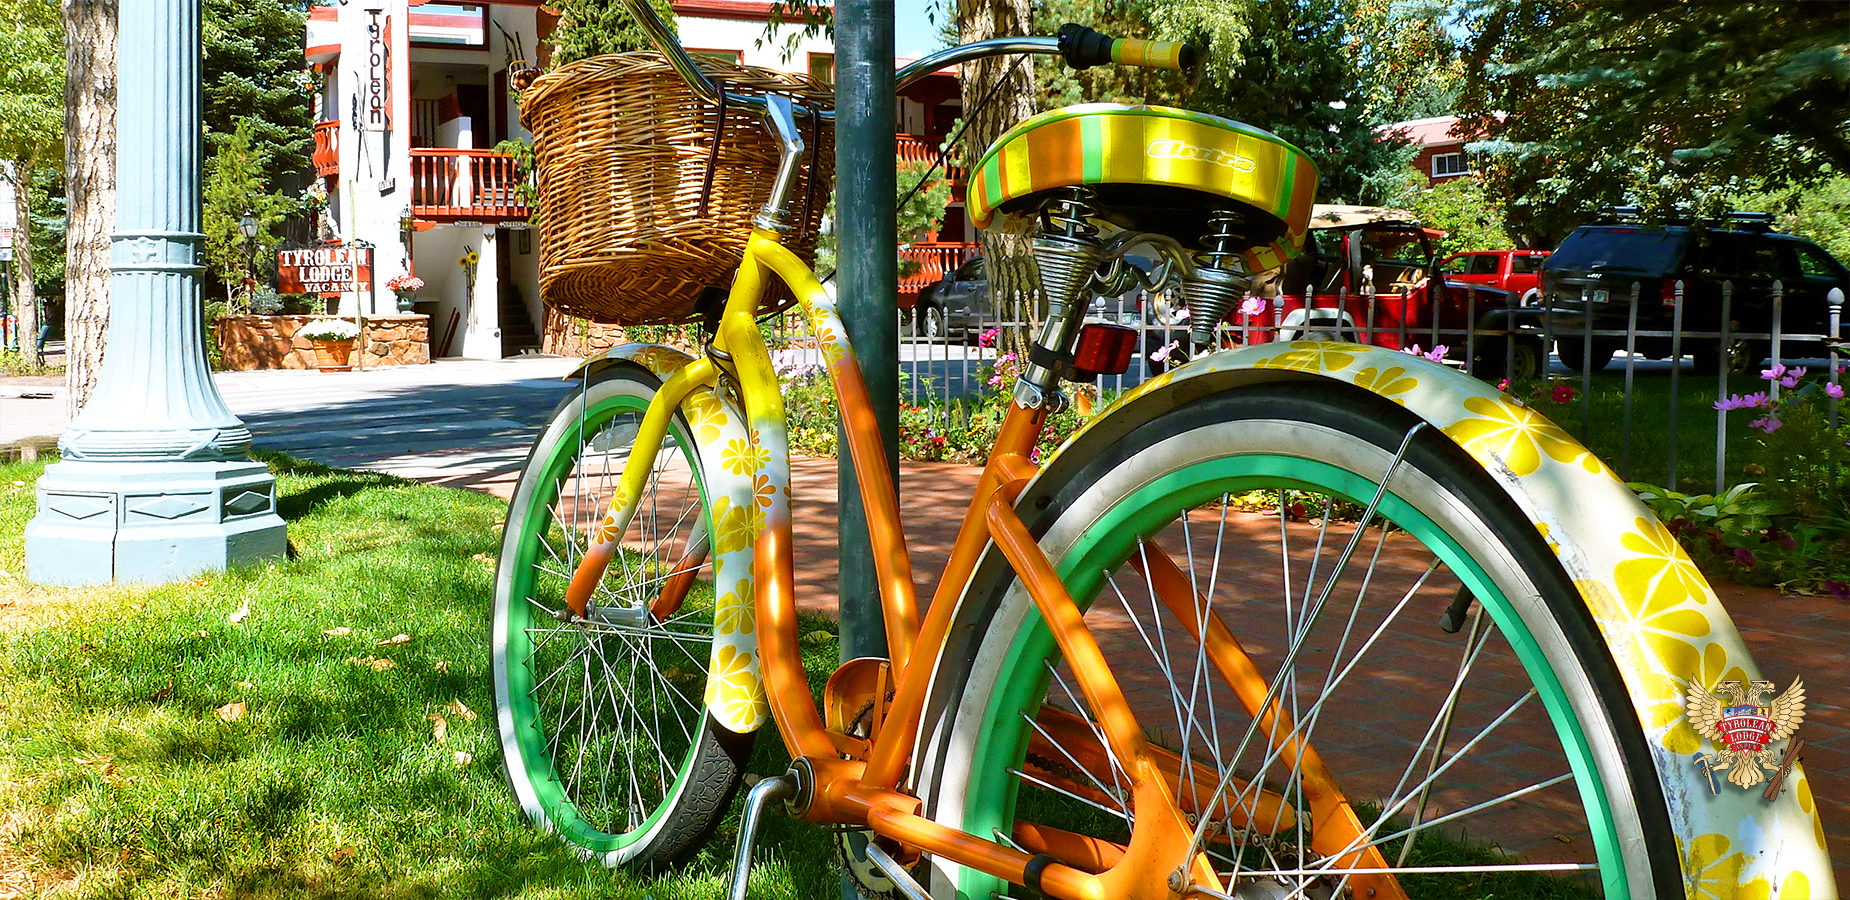 Town bikes are wonderful ways to see Aspen in the summer